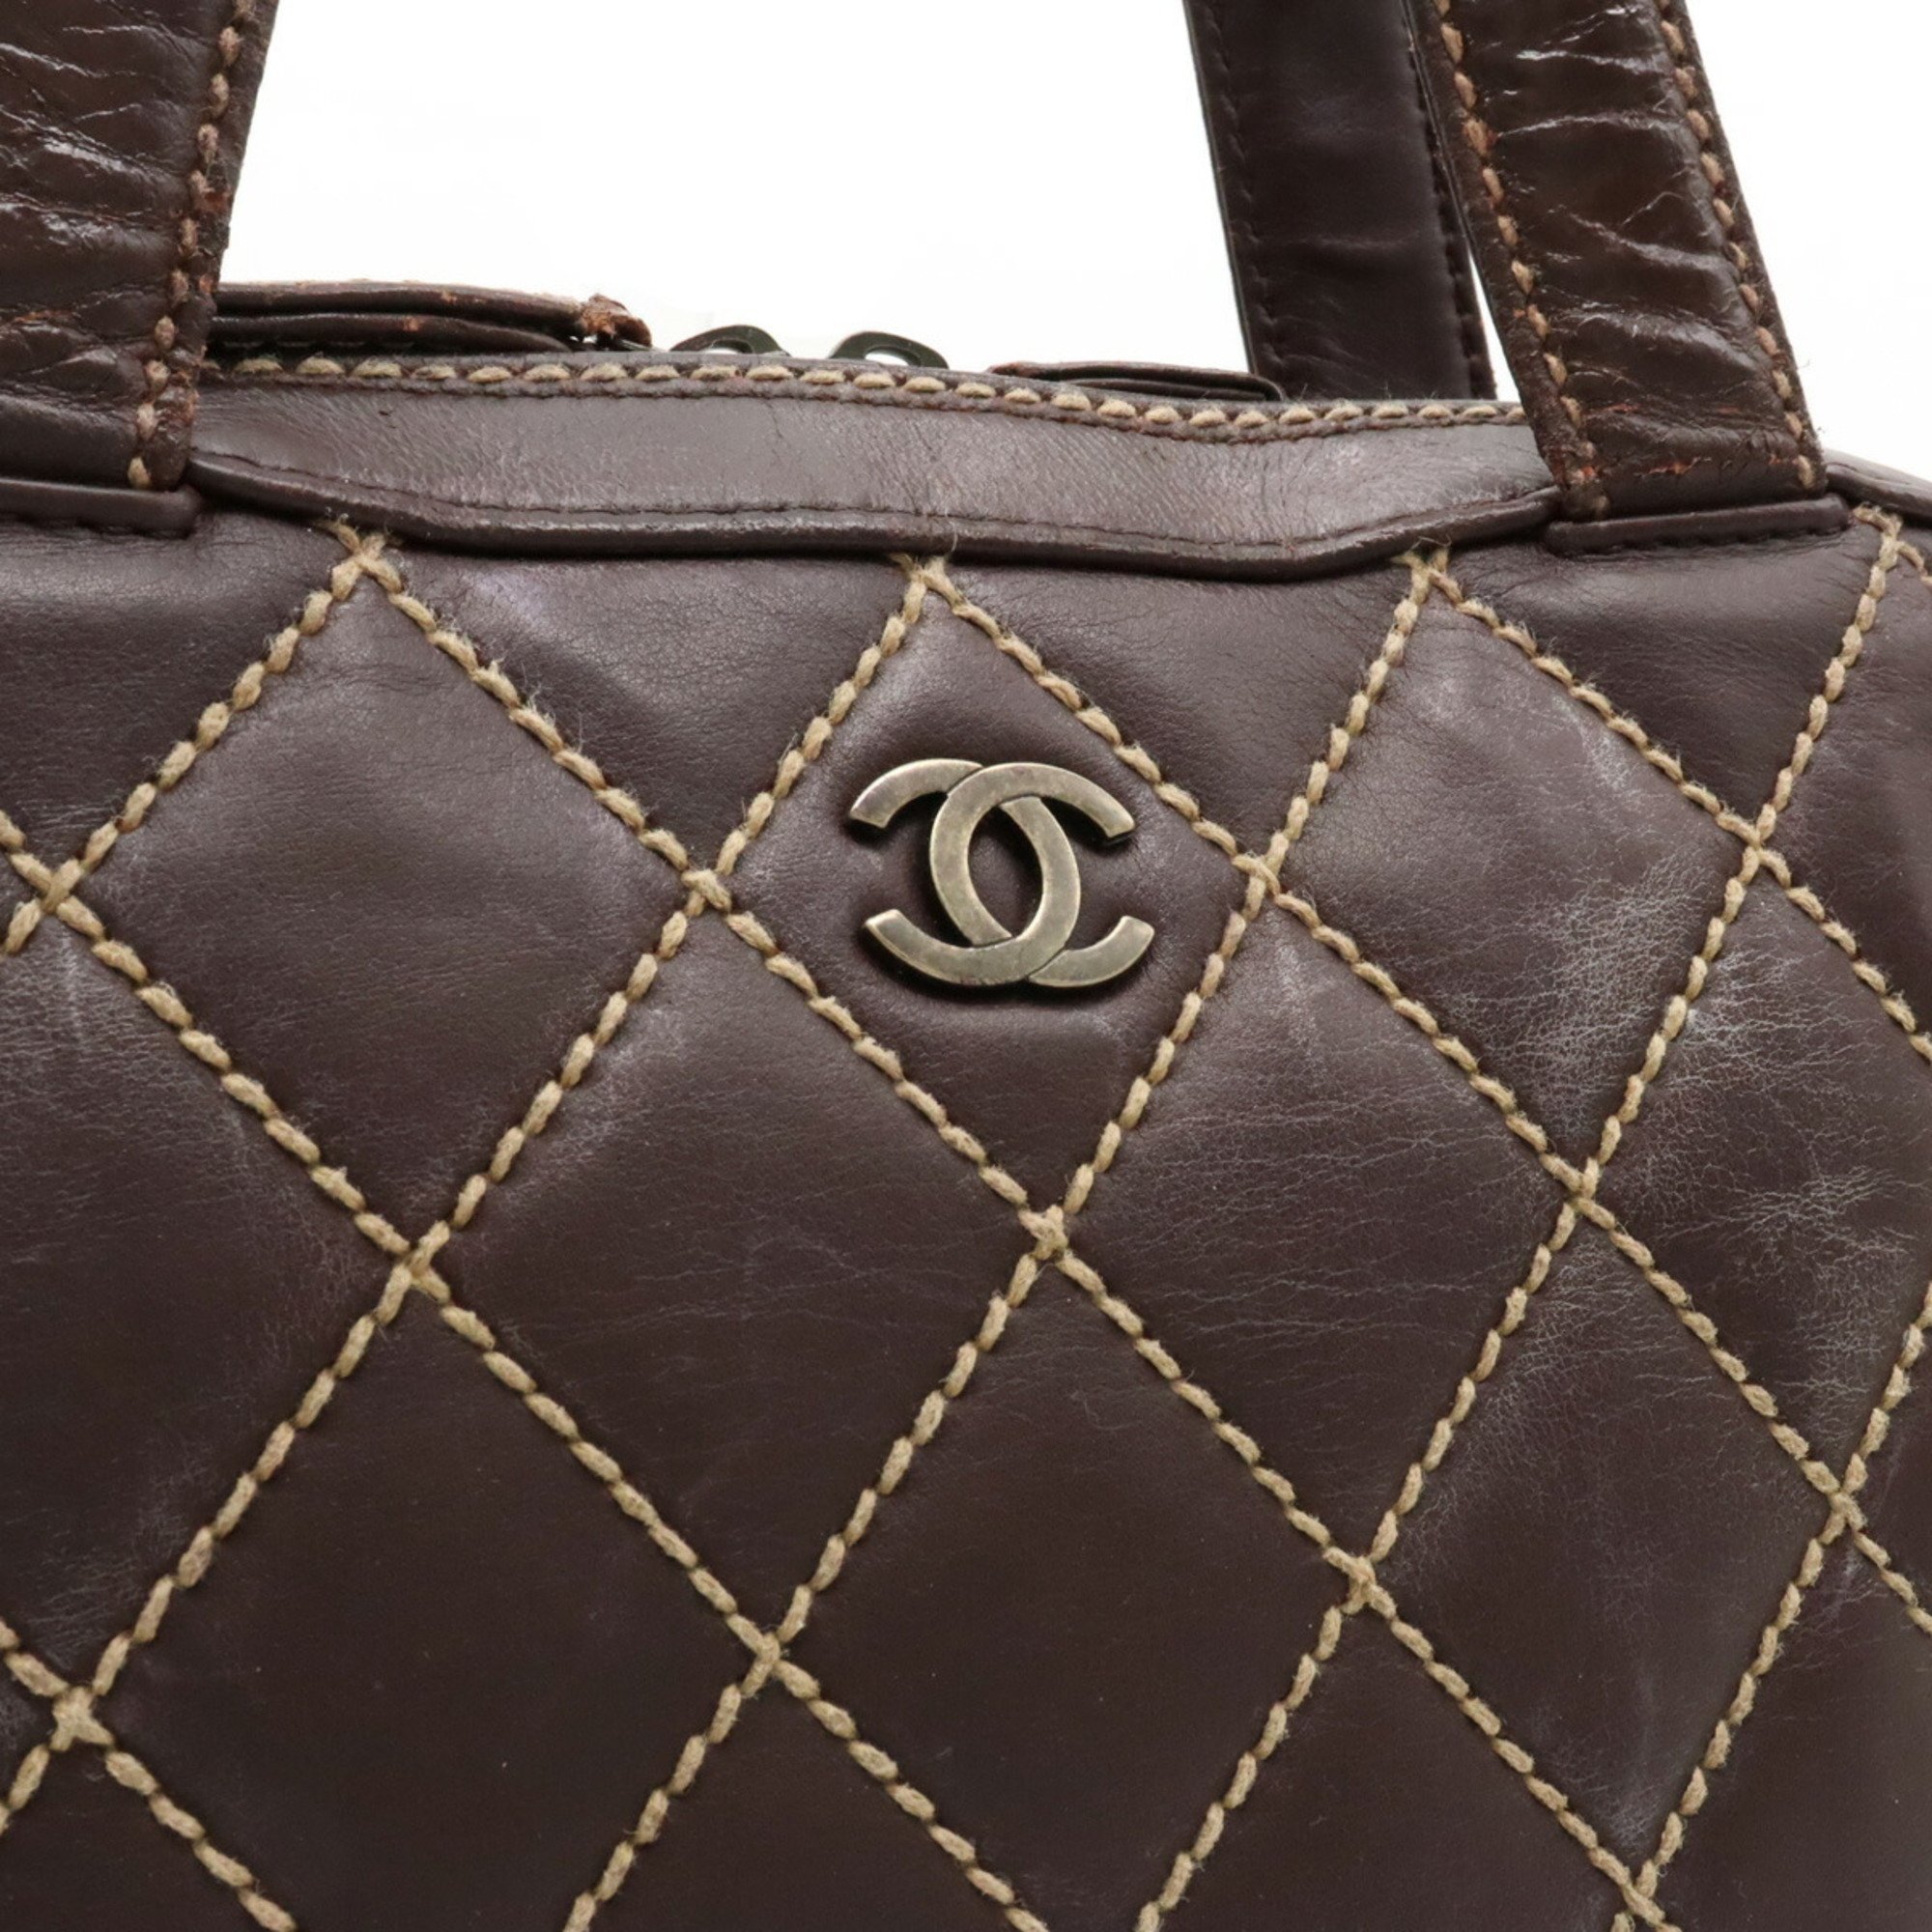 CHANEL Wild Stitch Coco Mark Tote Bag Handbag Leather Brown Pouch Missing A14693